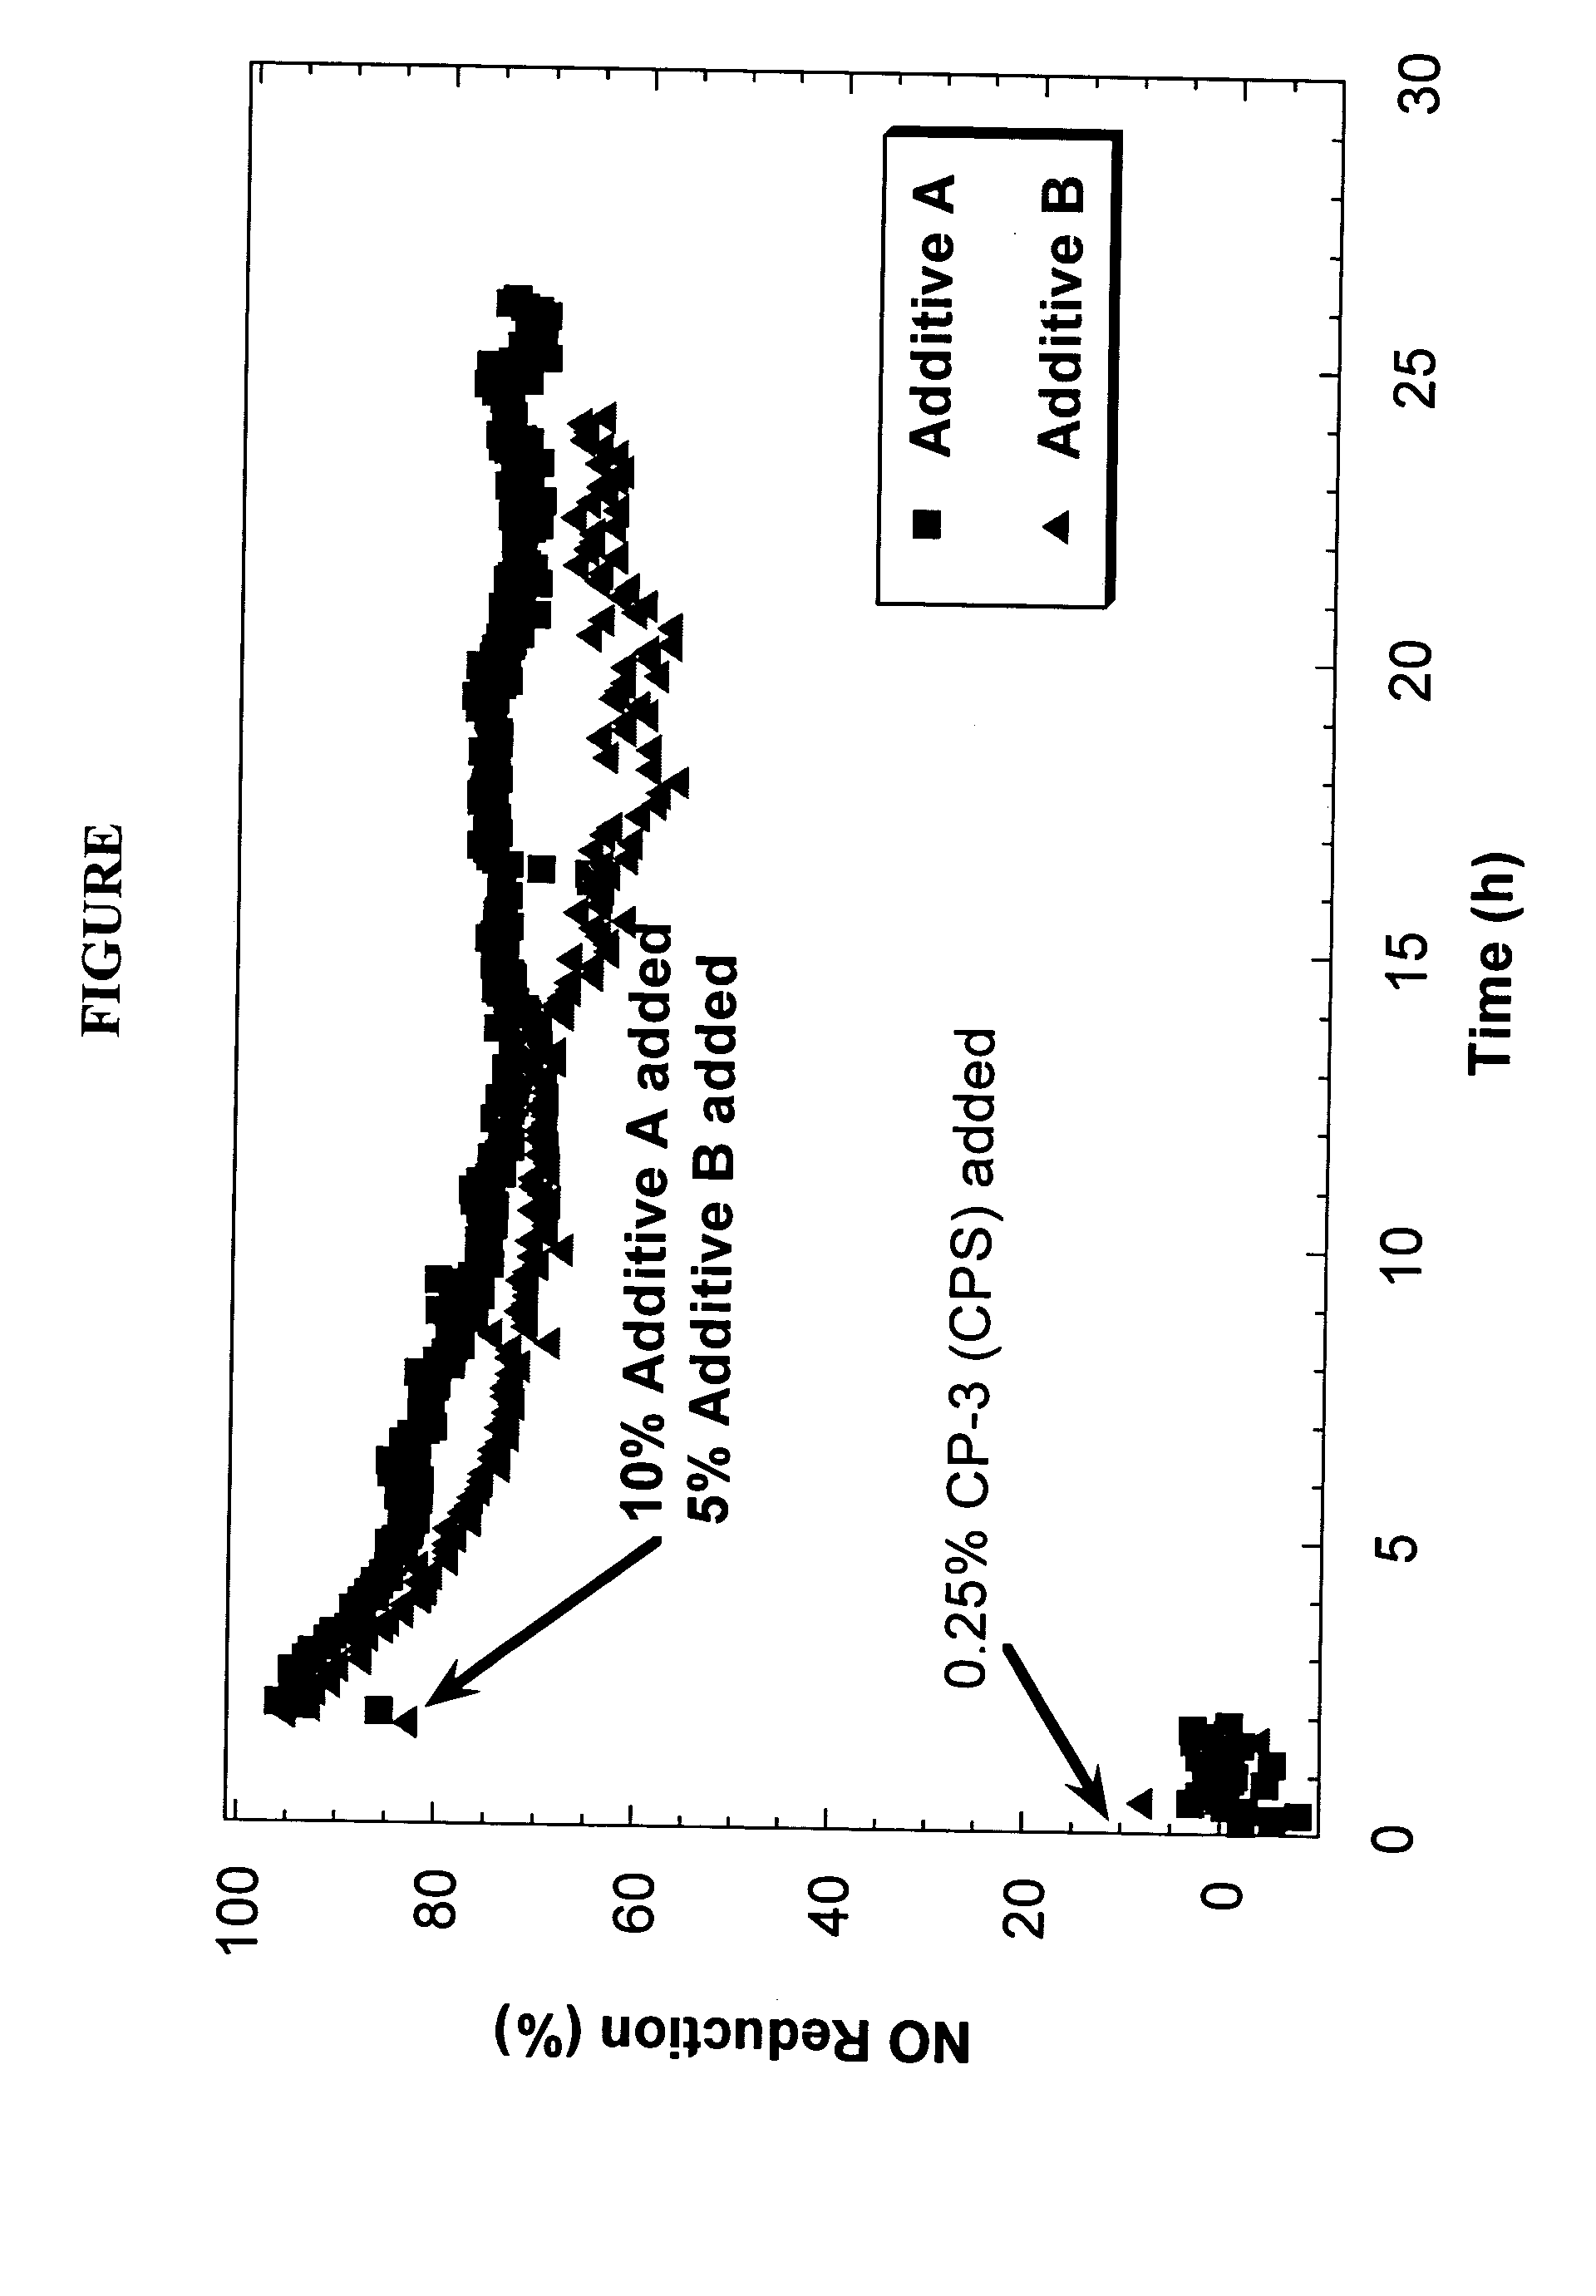 Ferrierite compositions for reducing NOx emissions during fluid catalytic cracking